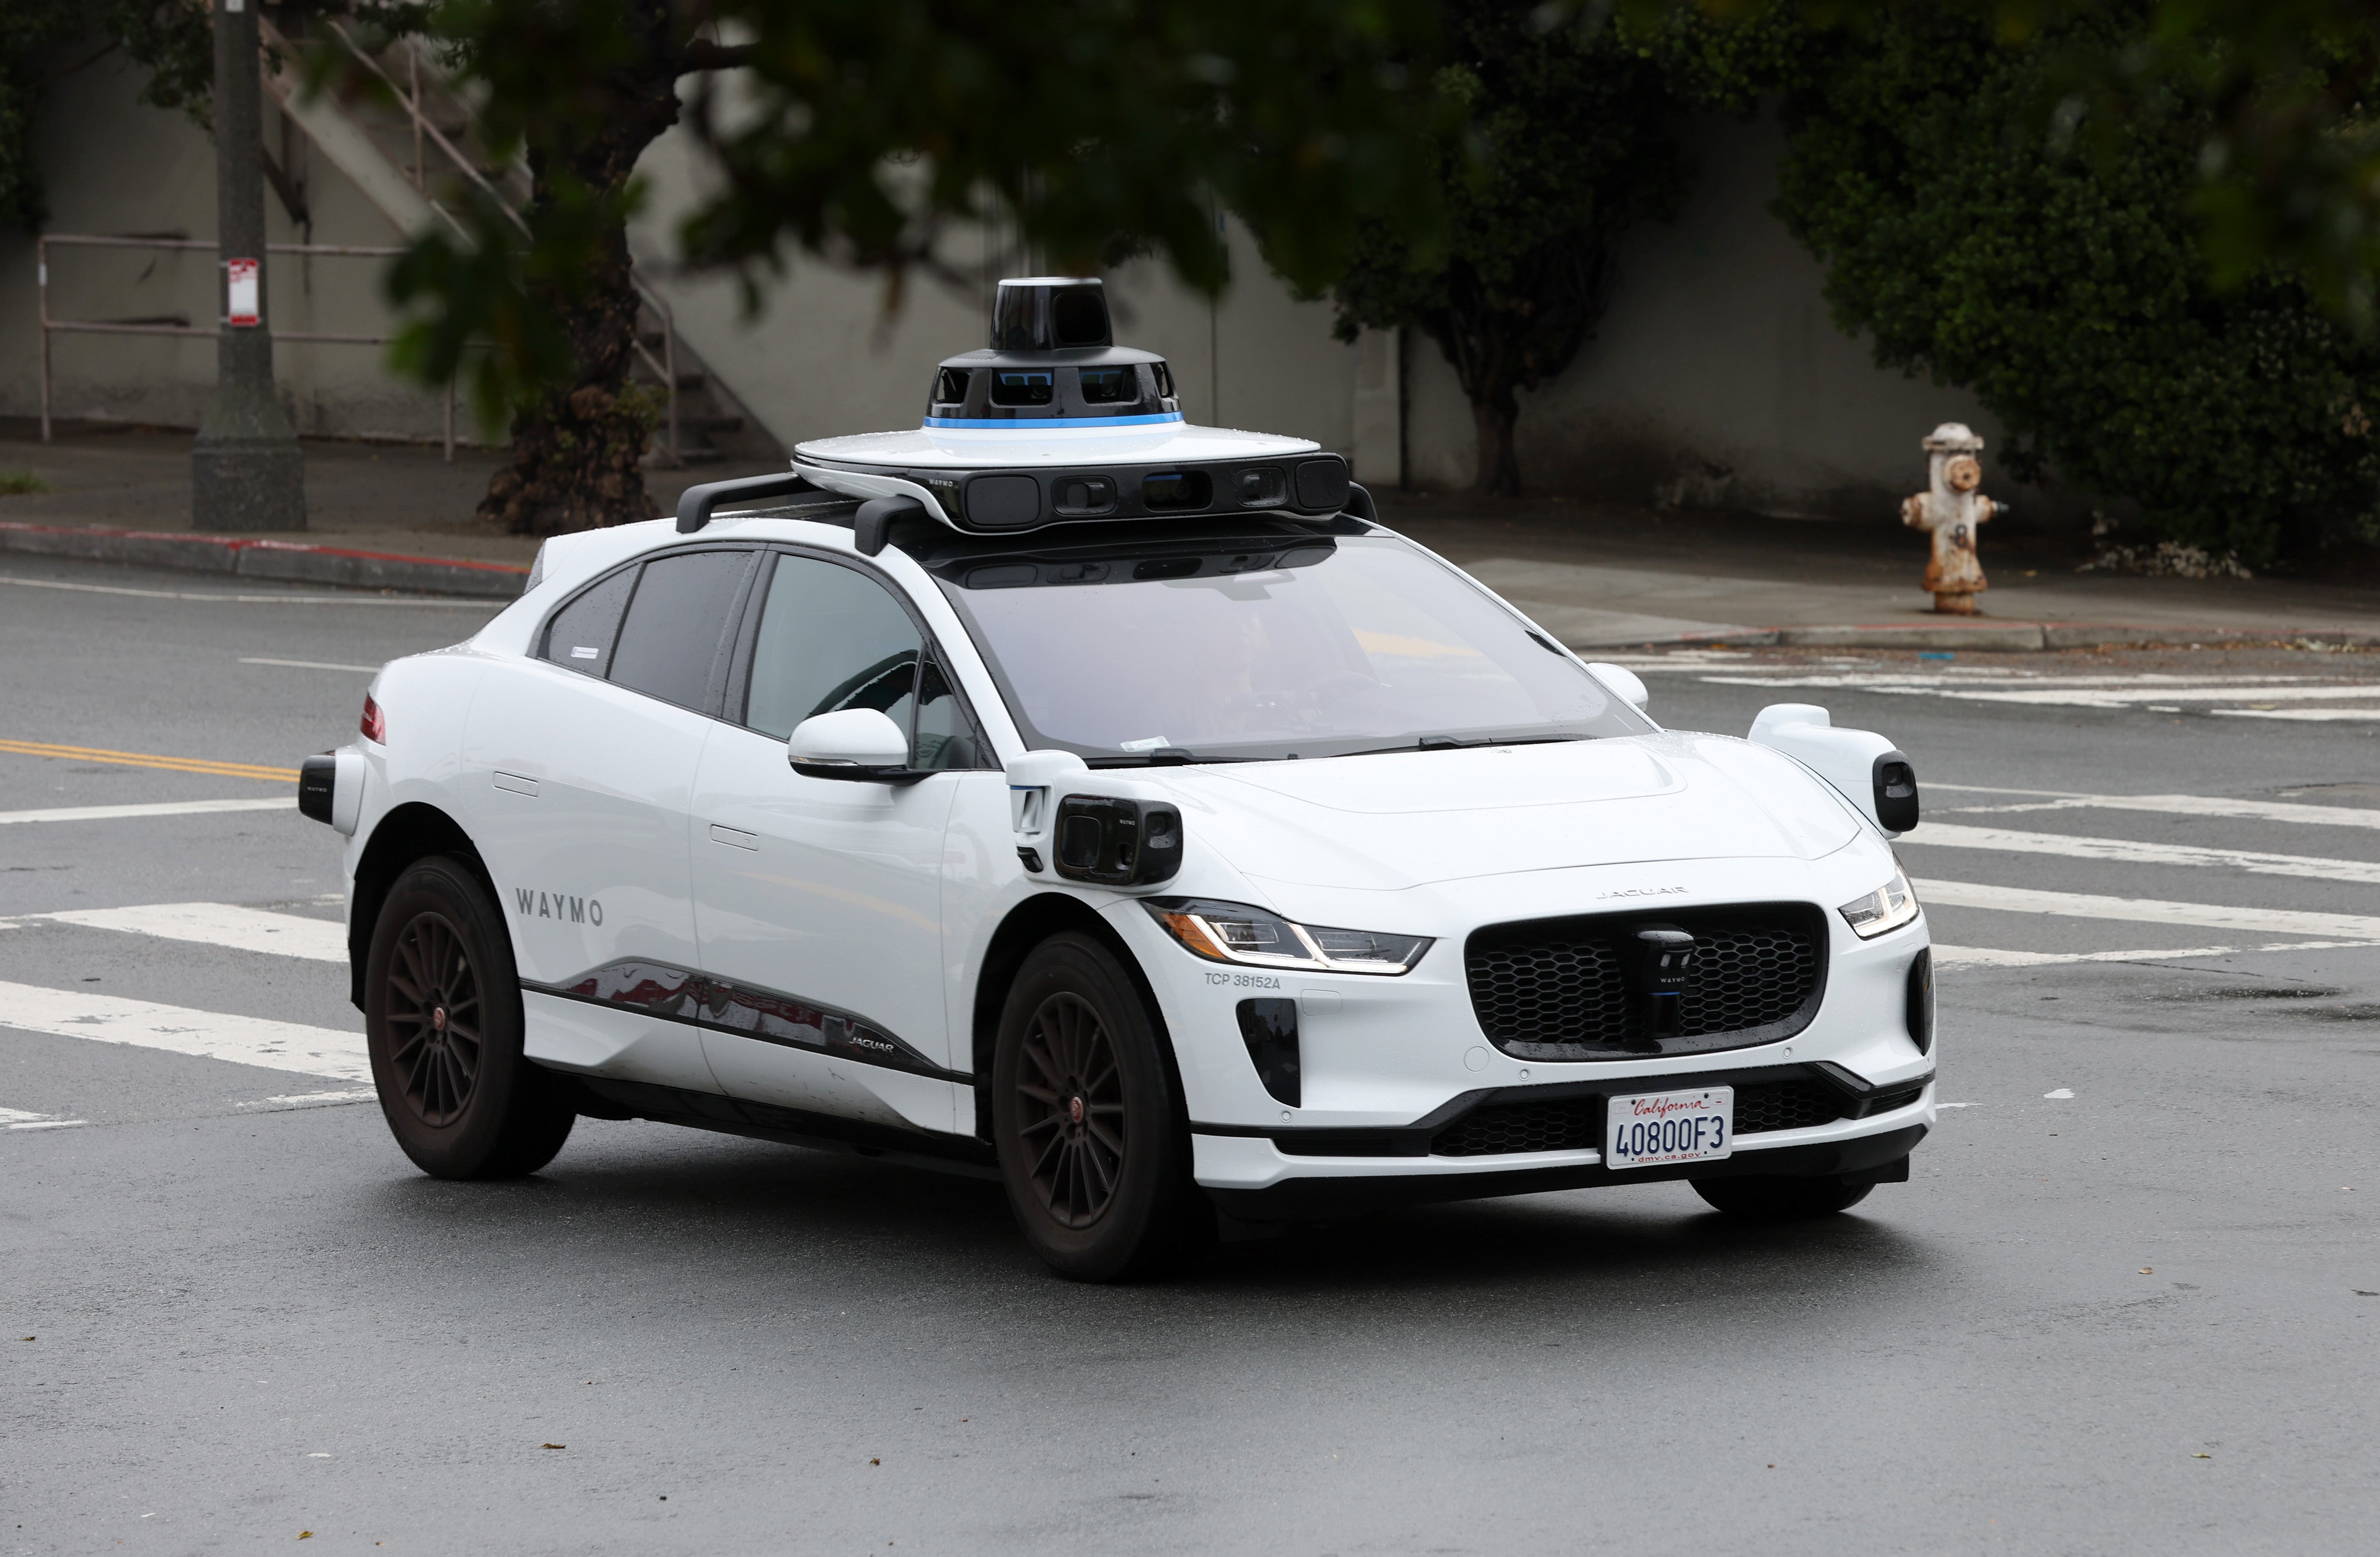 San Francisco Police are Using Driverless Cars for Surveillance